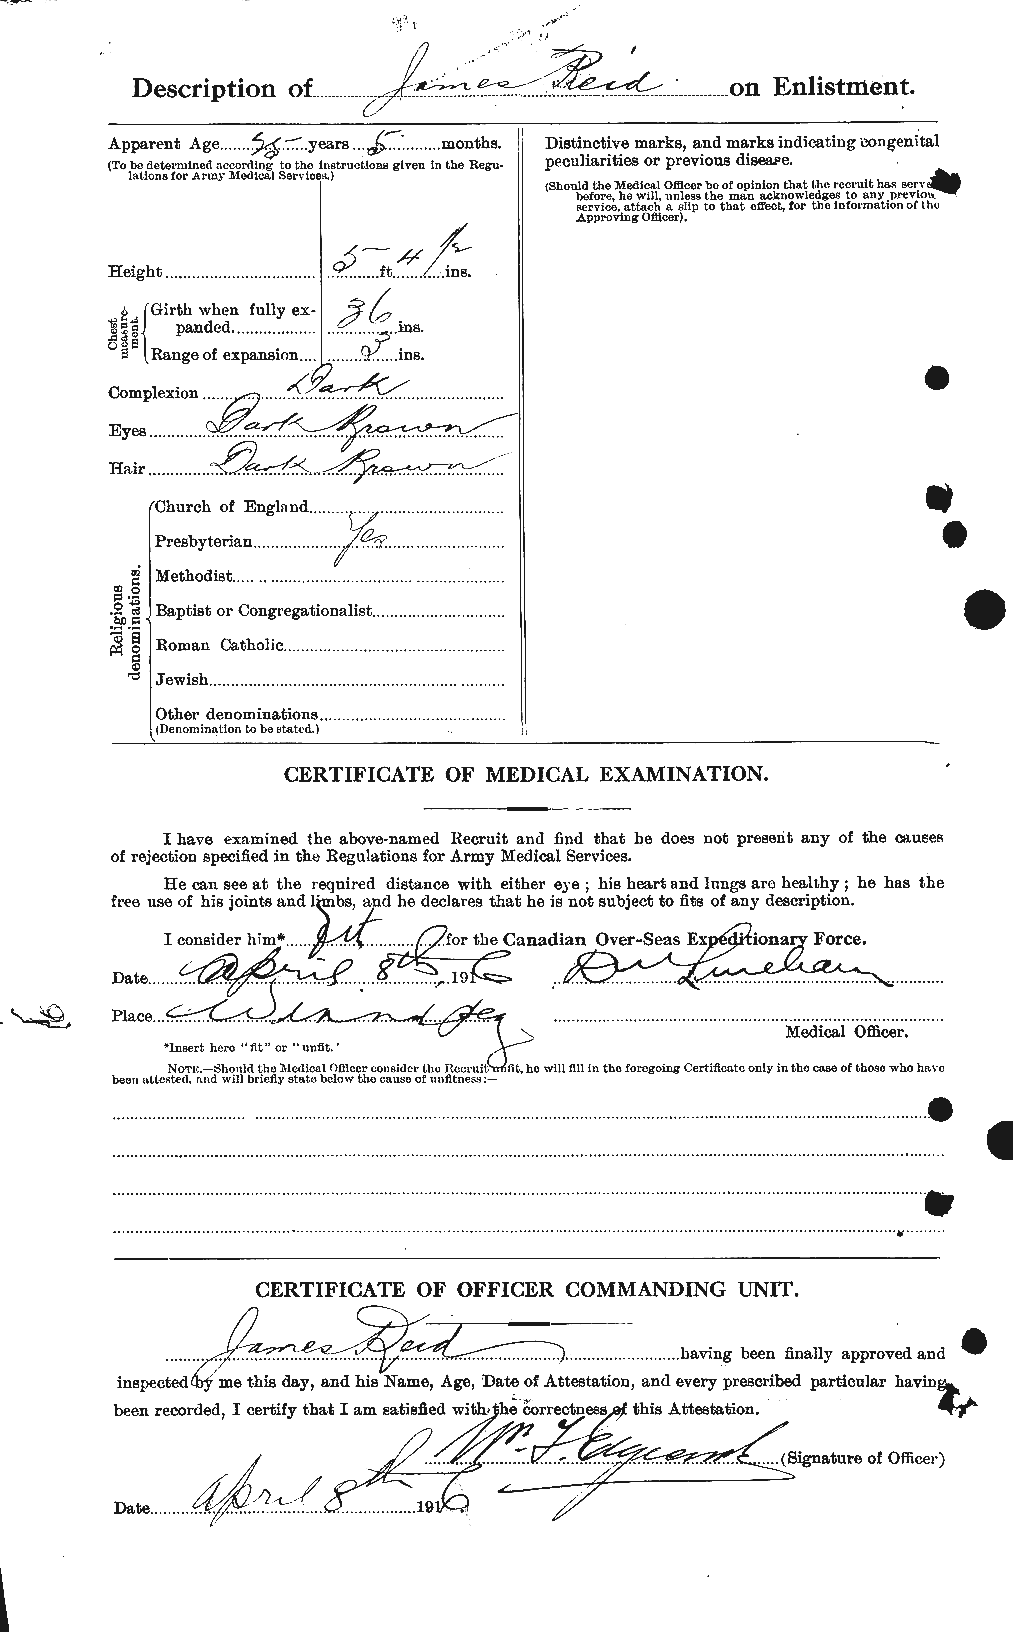 Personnel Records of the First World War - CEF 598663b